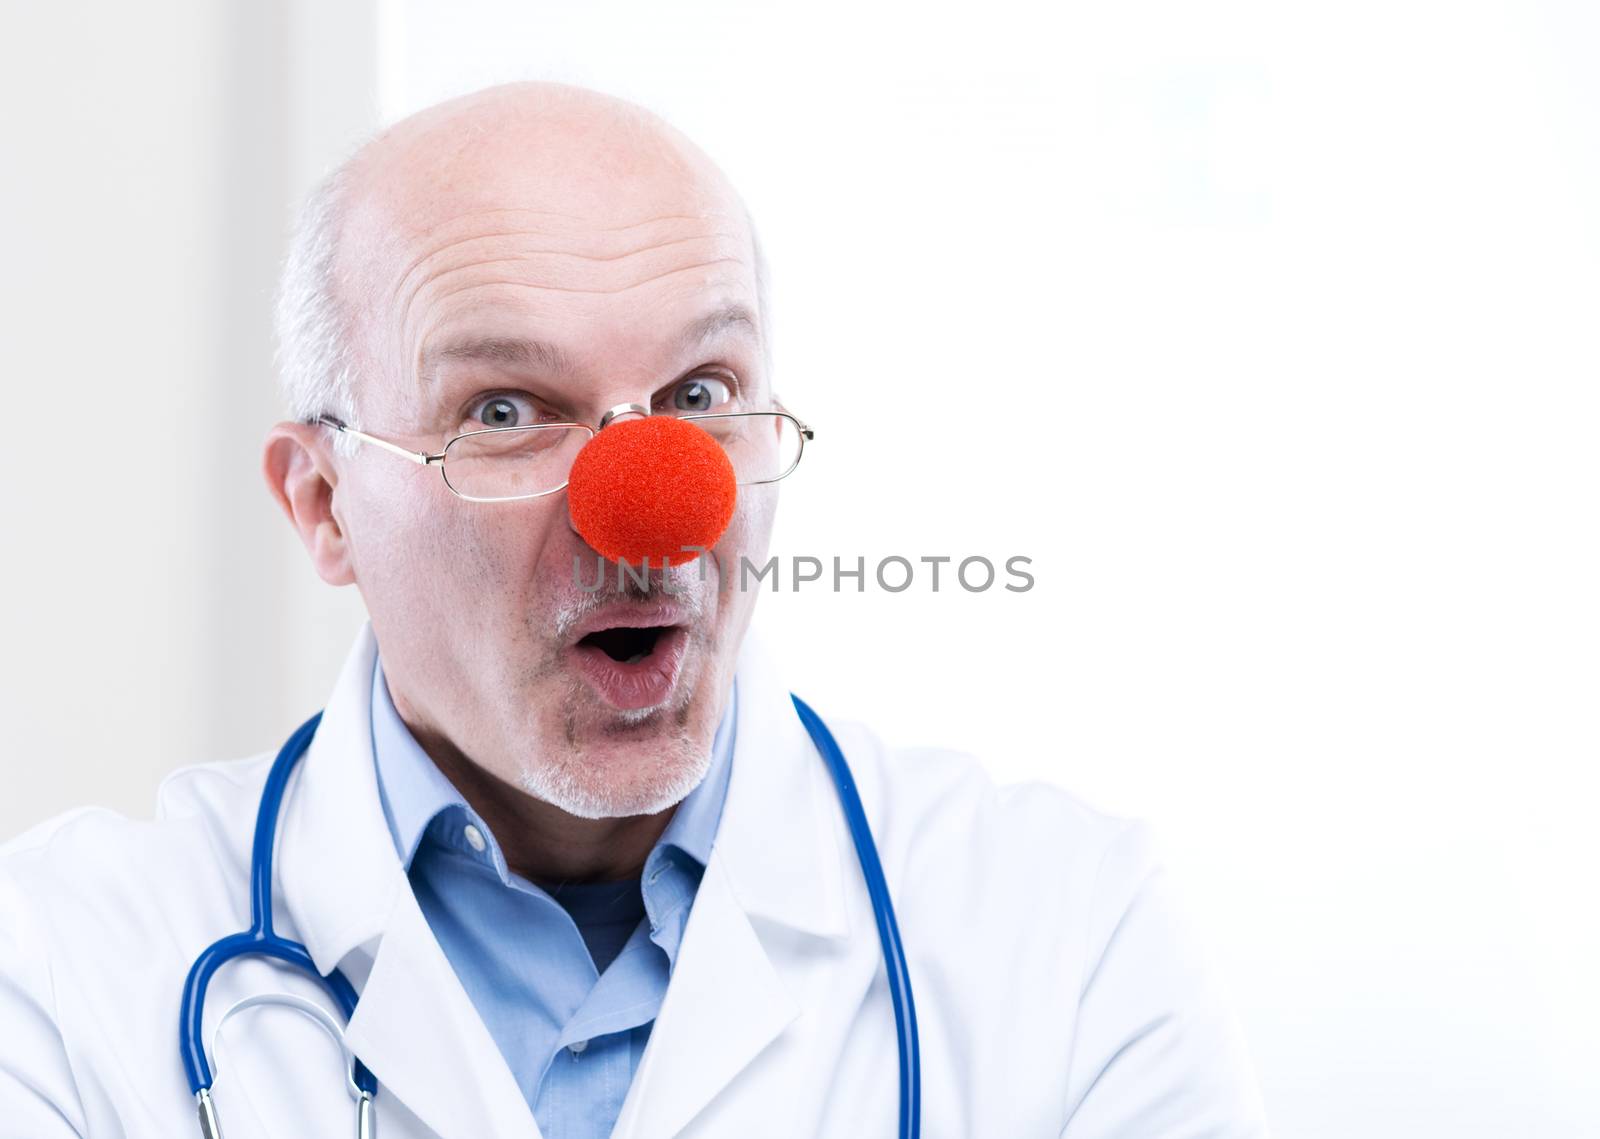 Clown doctor portrait with medical equipment.